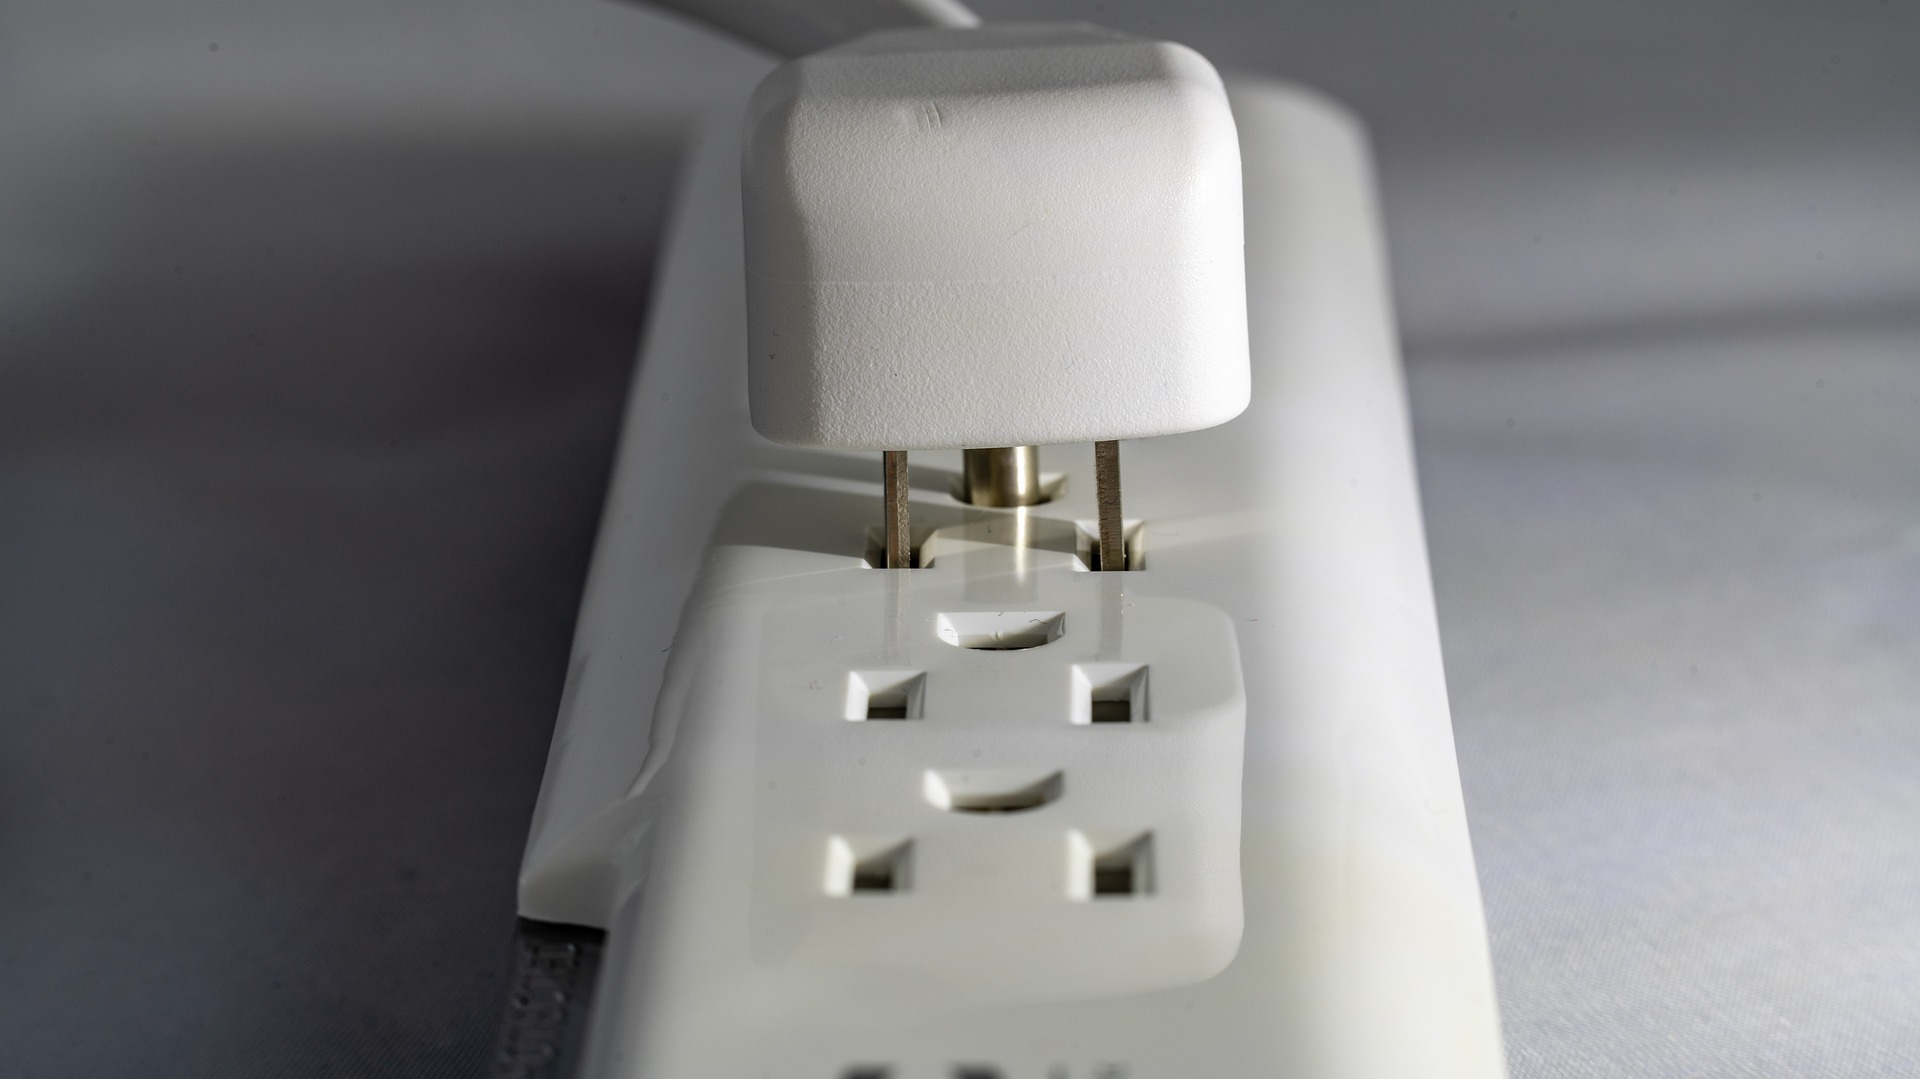 Power Strips vs Surge Protectors: What is the Difference?